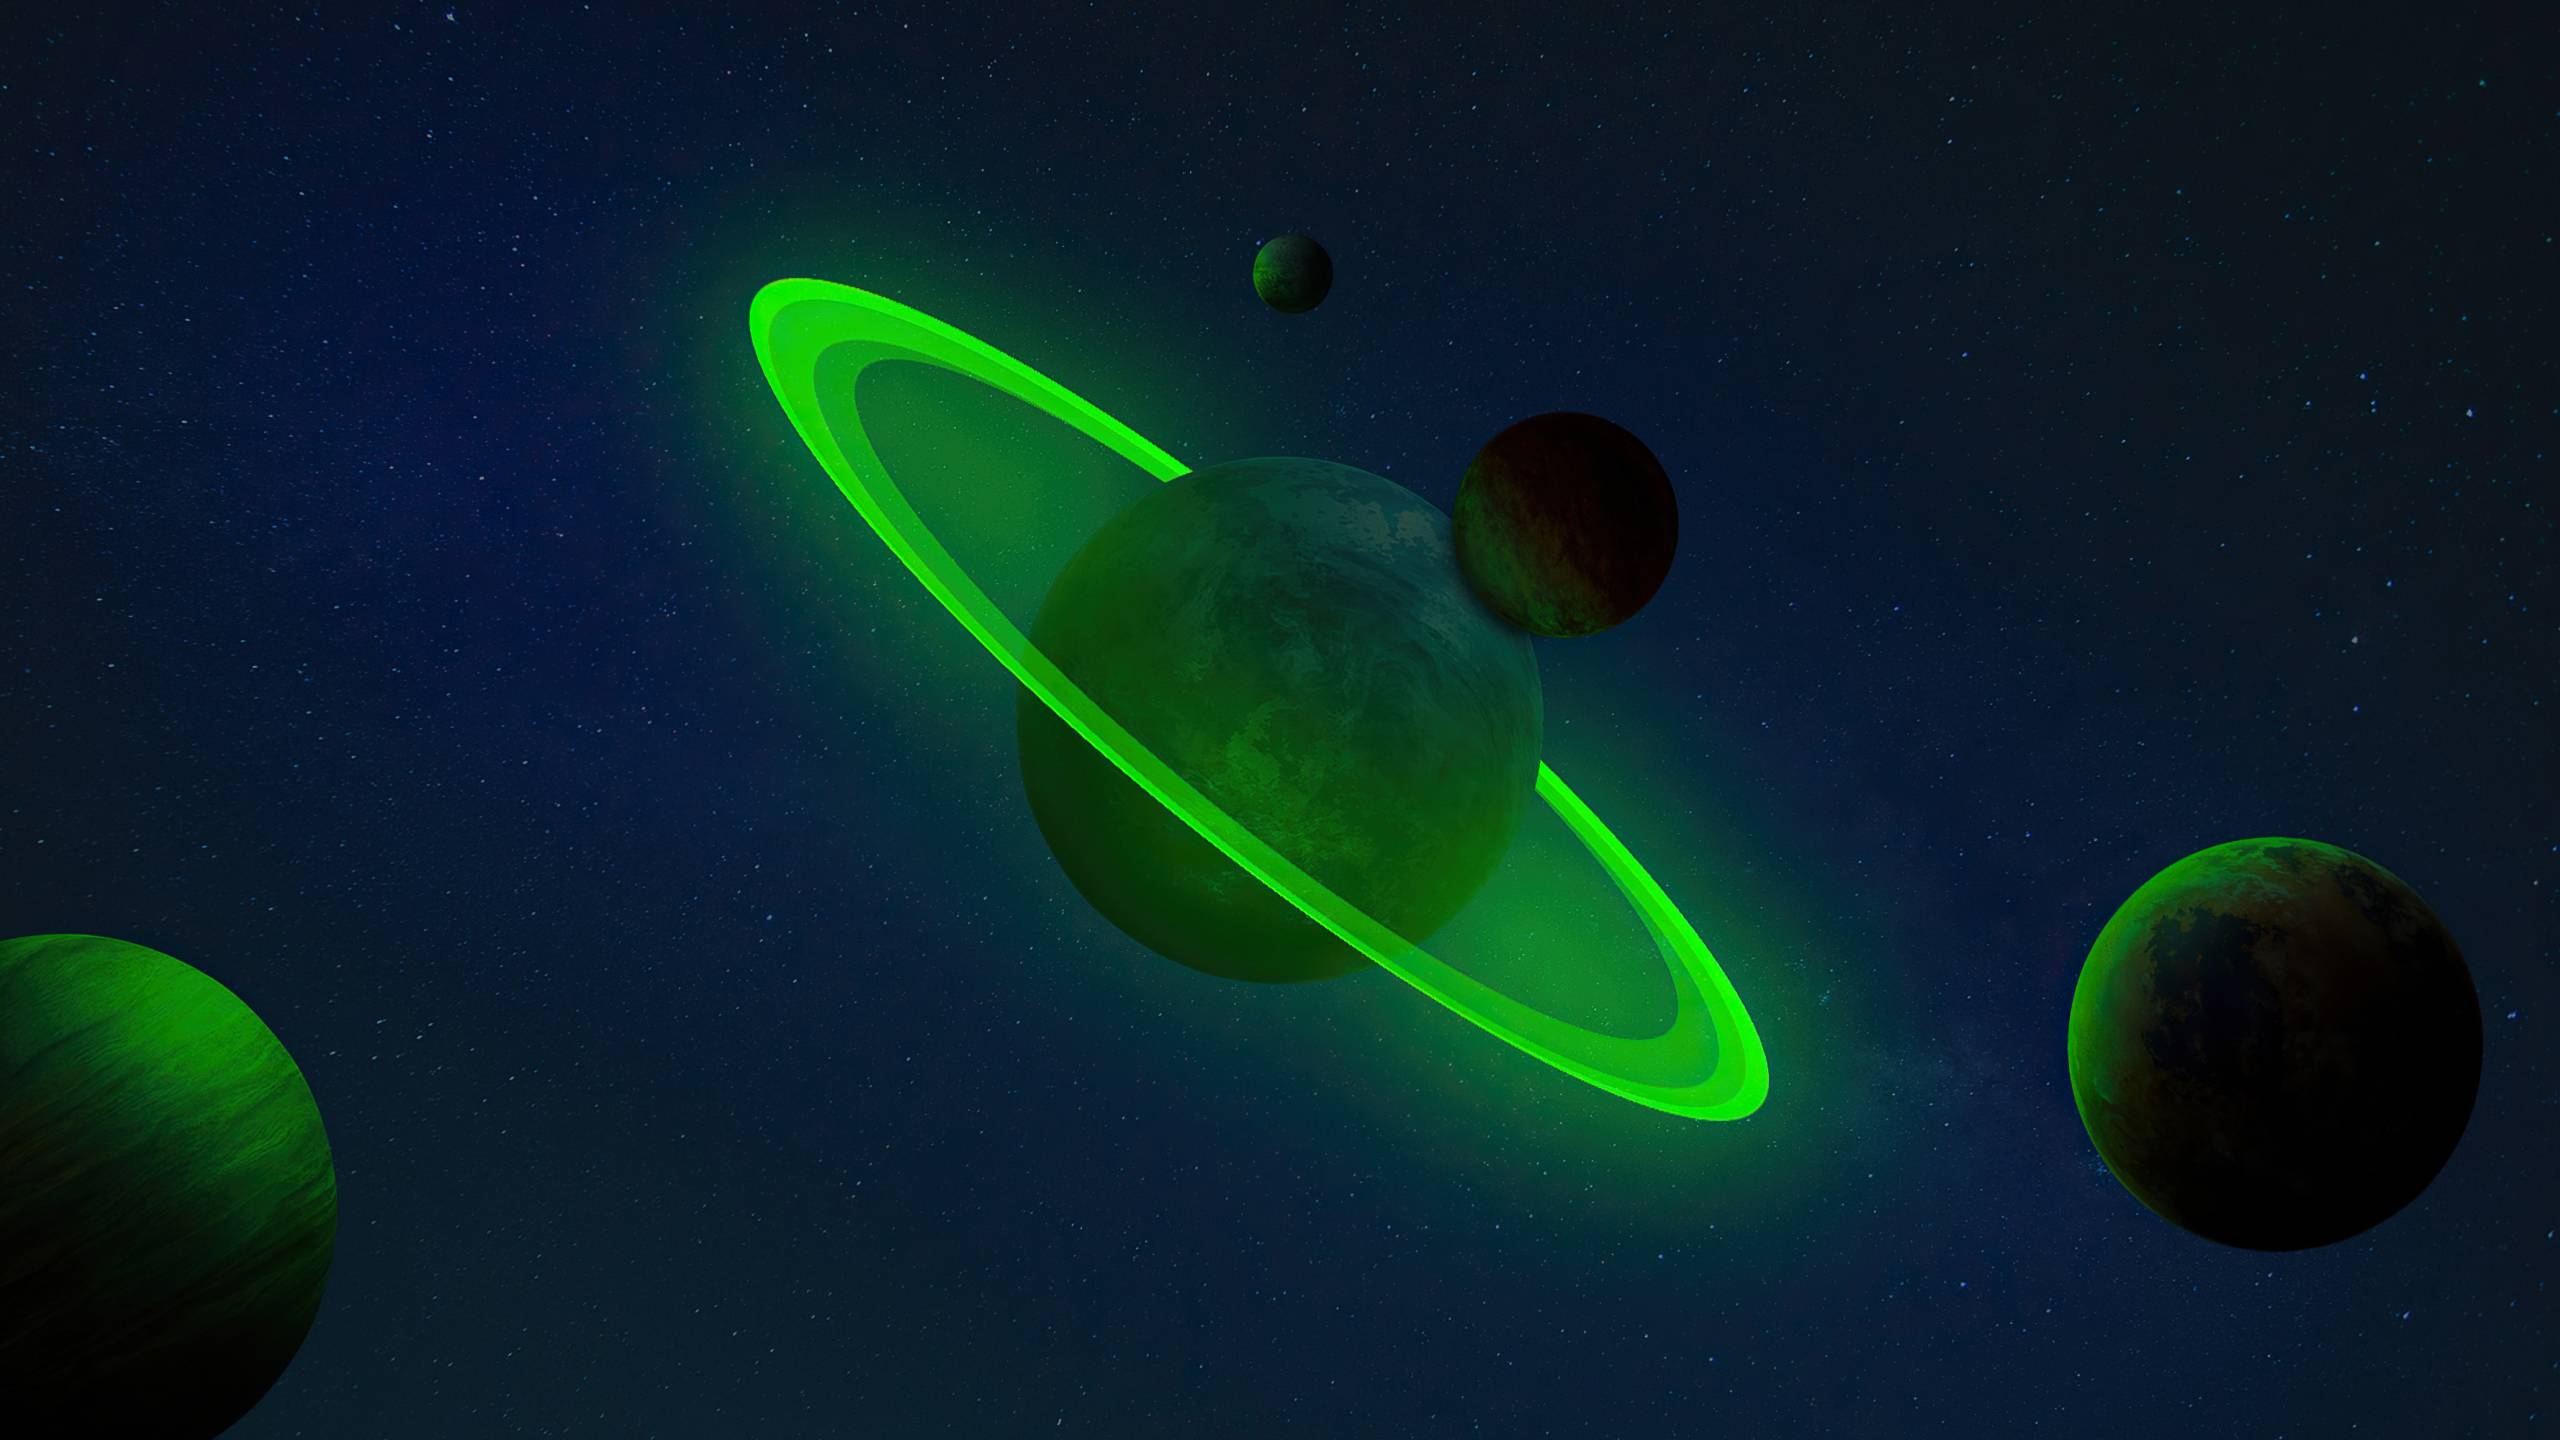 A green ringed planet in space - Neon green, lime green, space